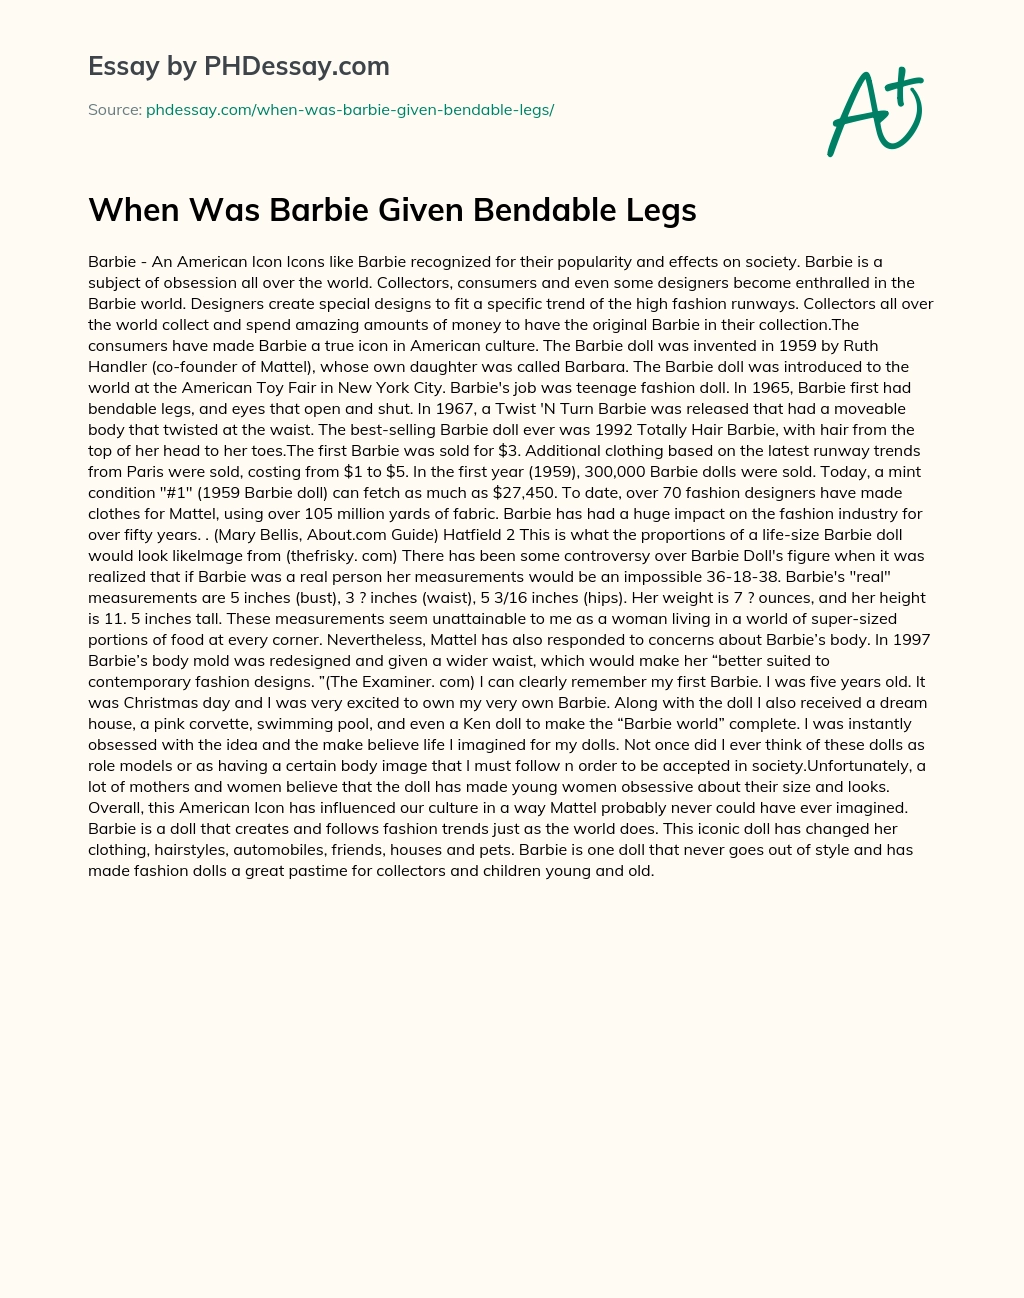 When Was Barbie Given Bendable Legs essay